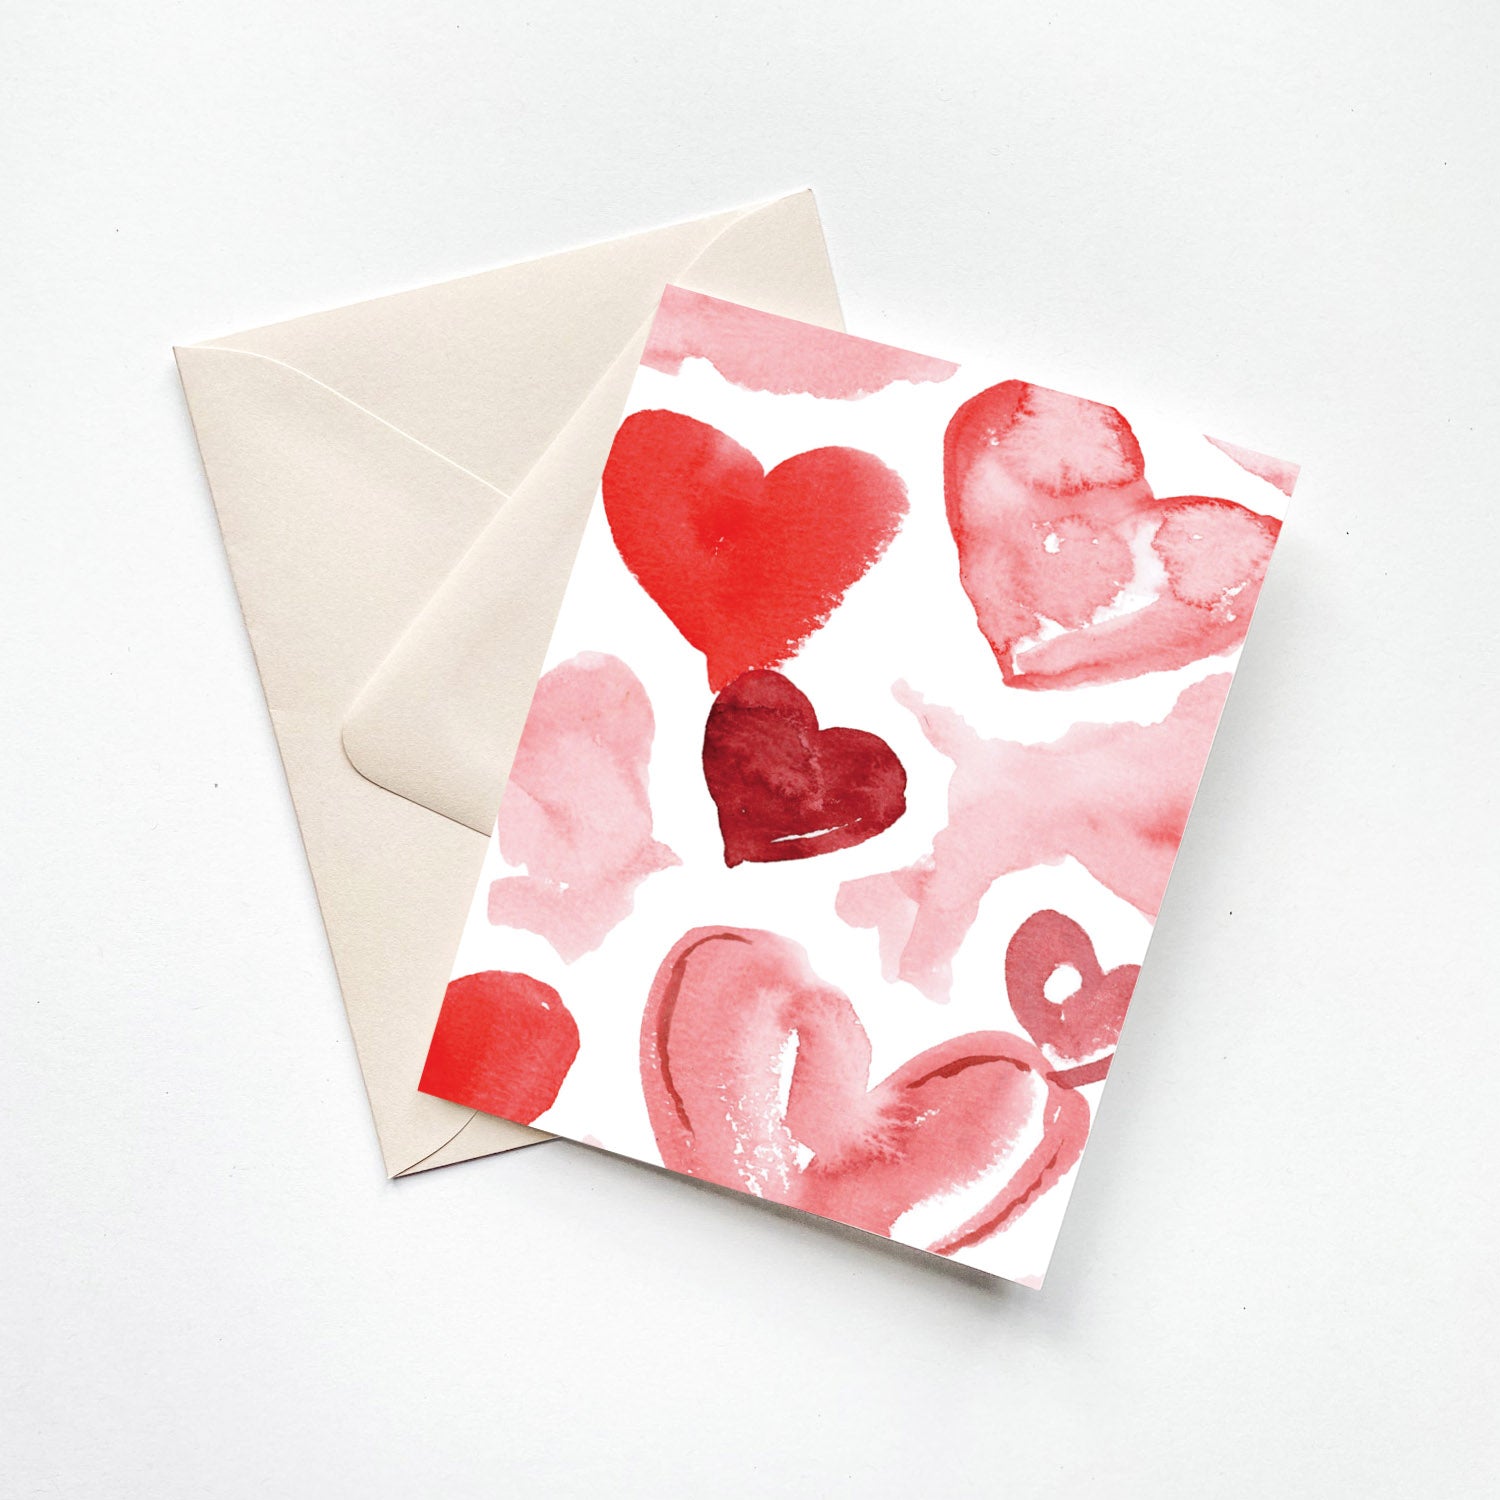 Abstract Hearts Valentine's Card